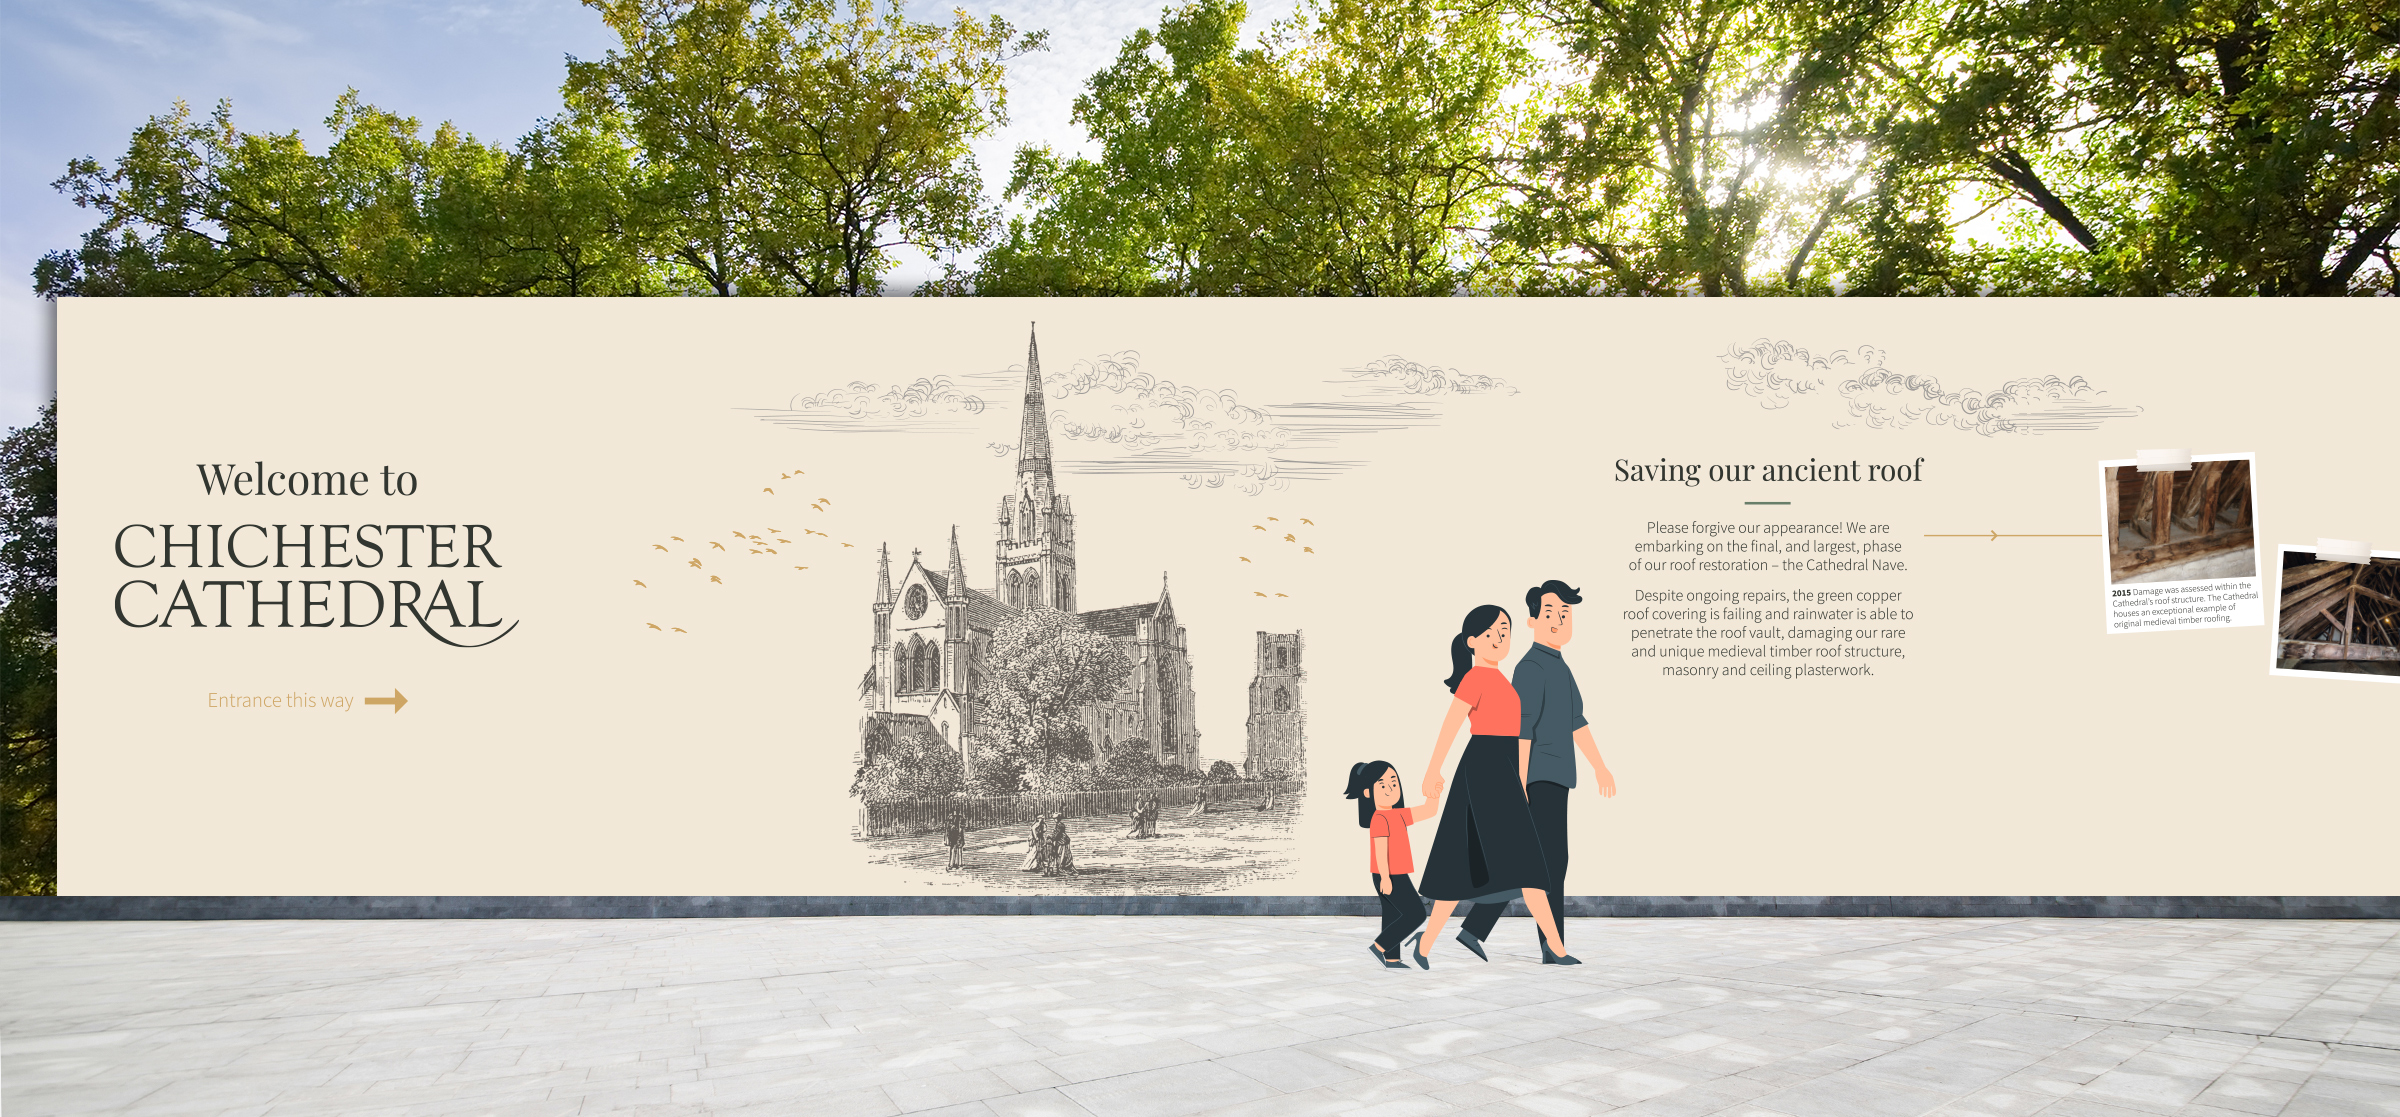 Chichester Cathedral Large Format Advertising